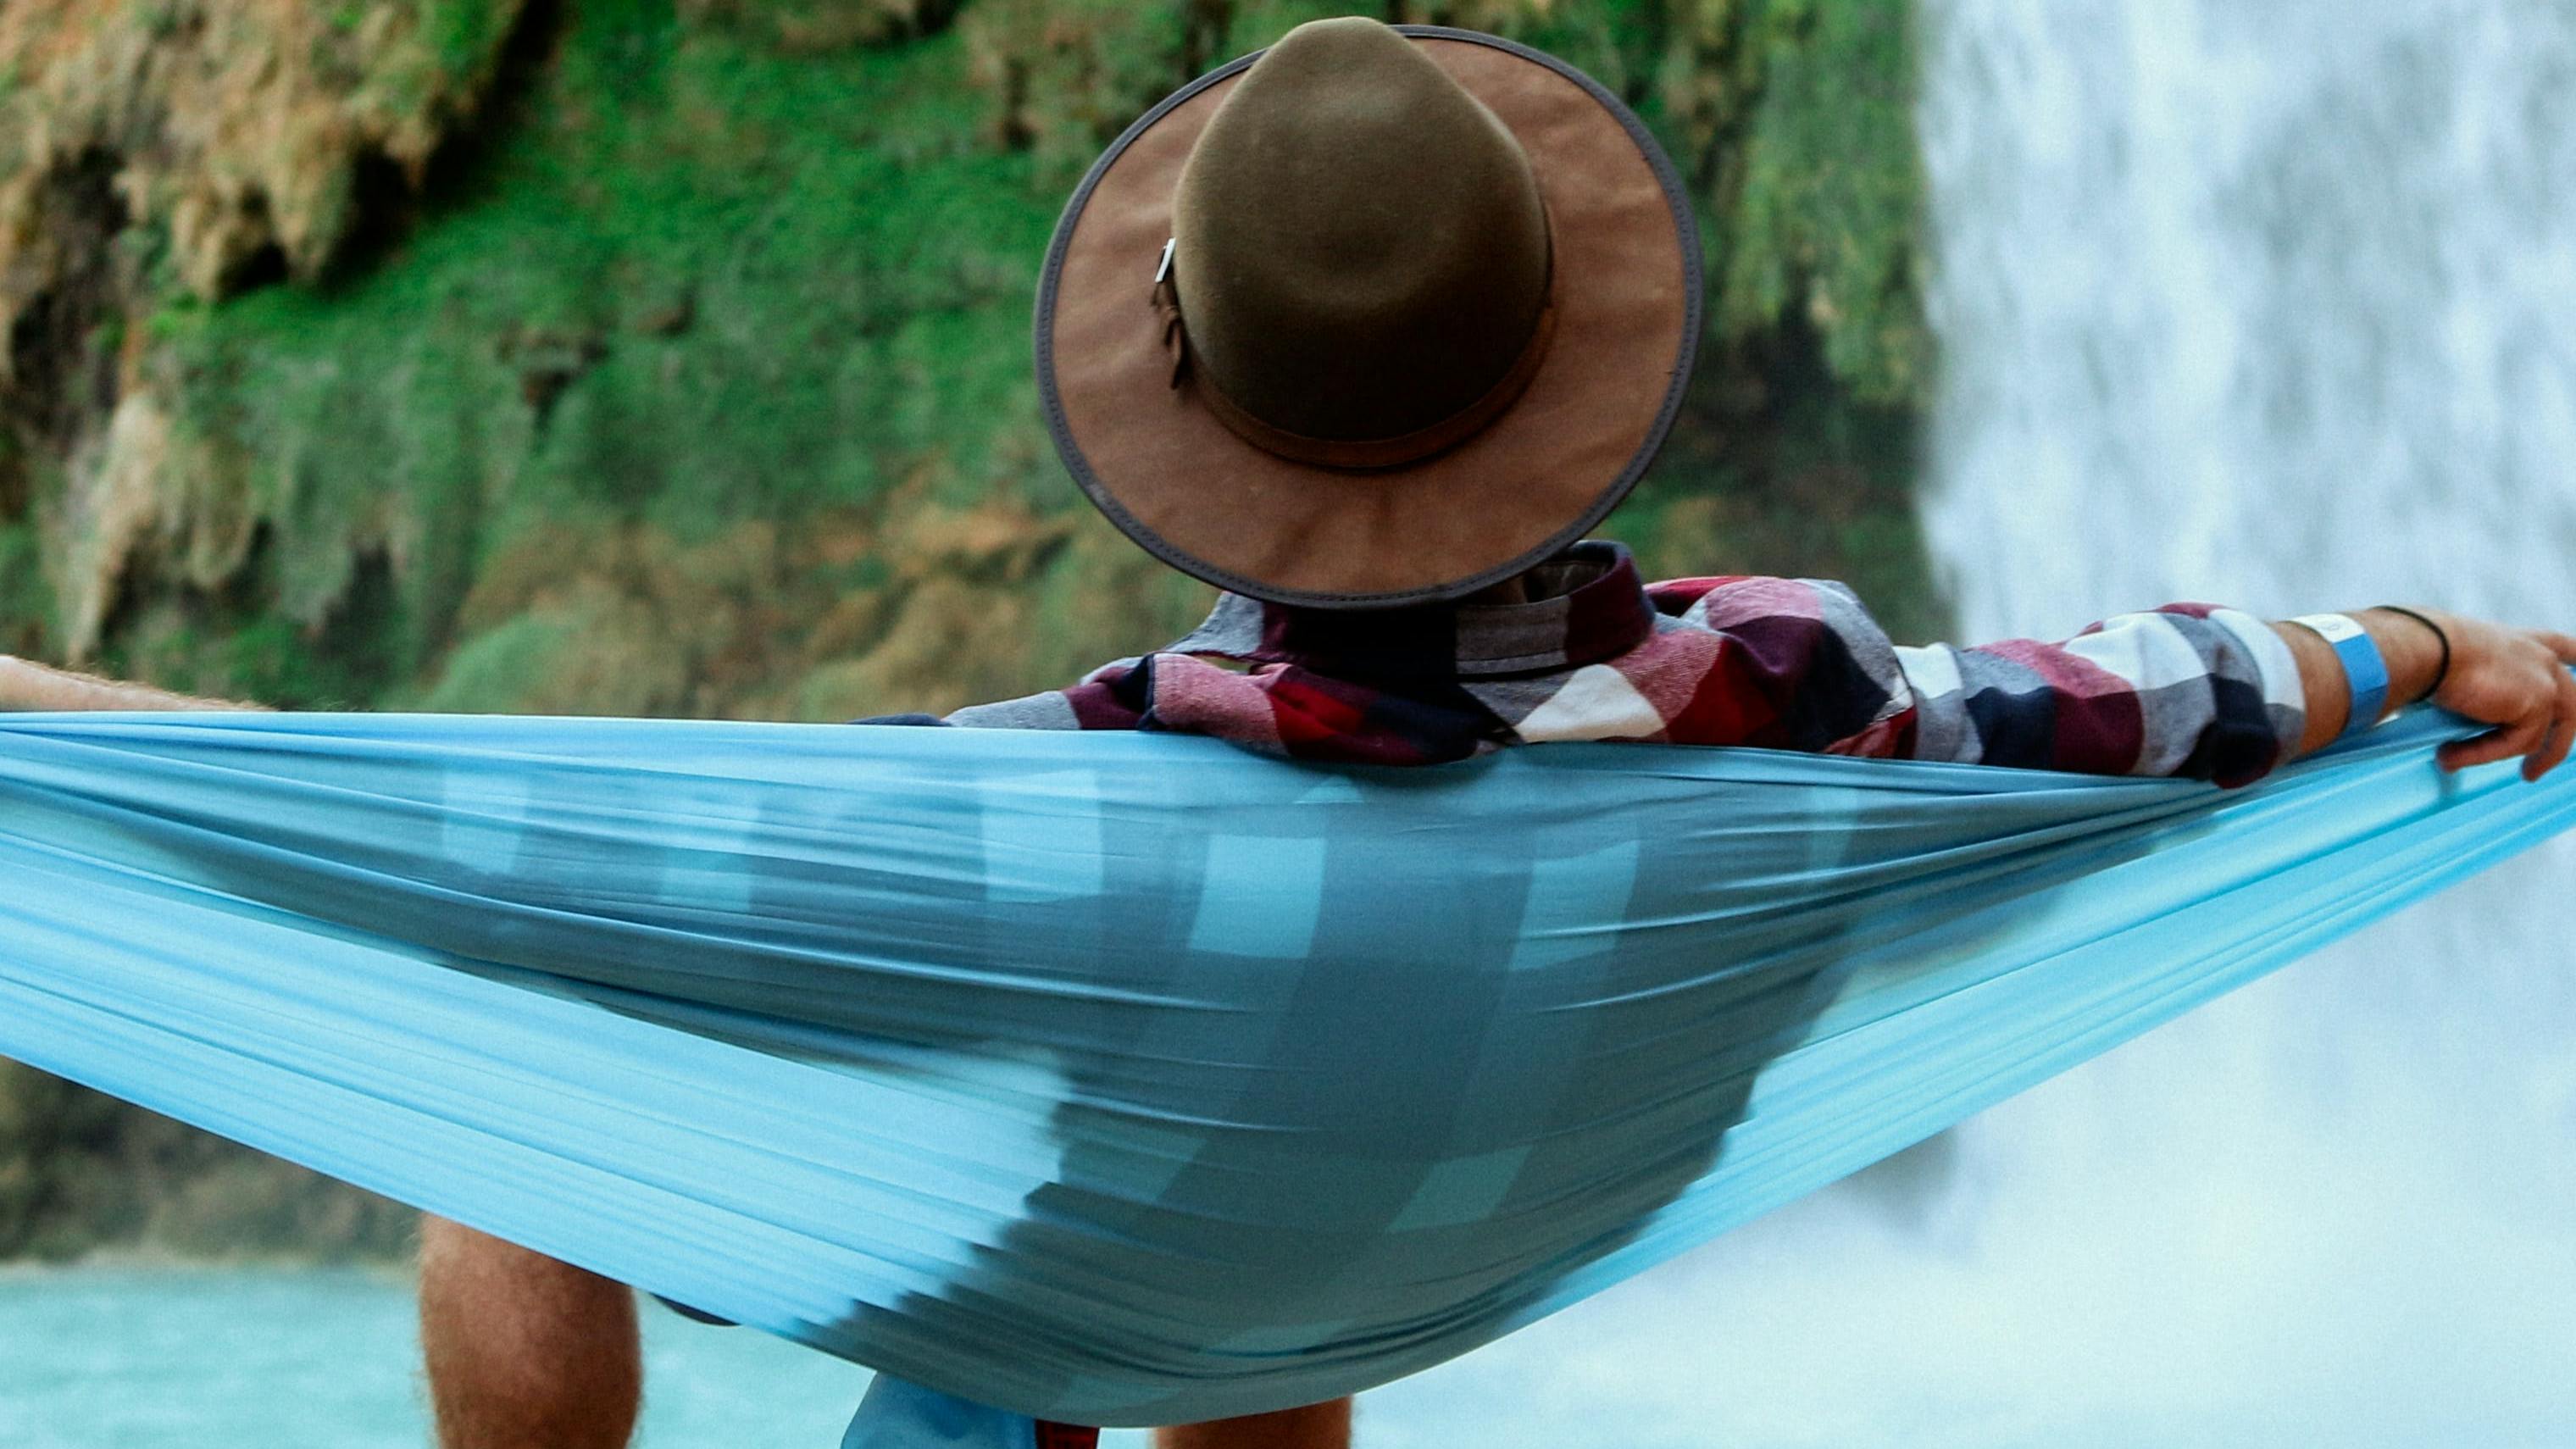 A man sitting in a hammock looking at a waterfall.